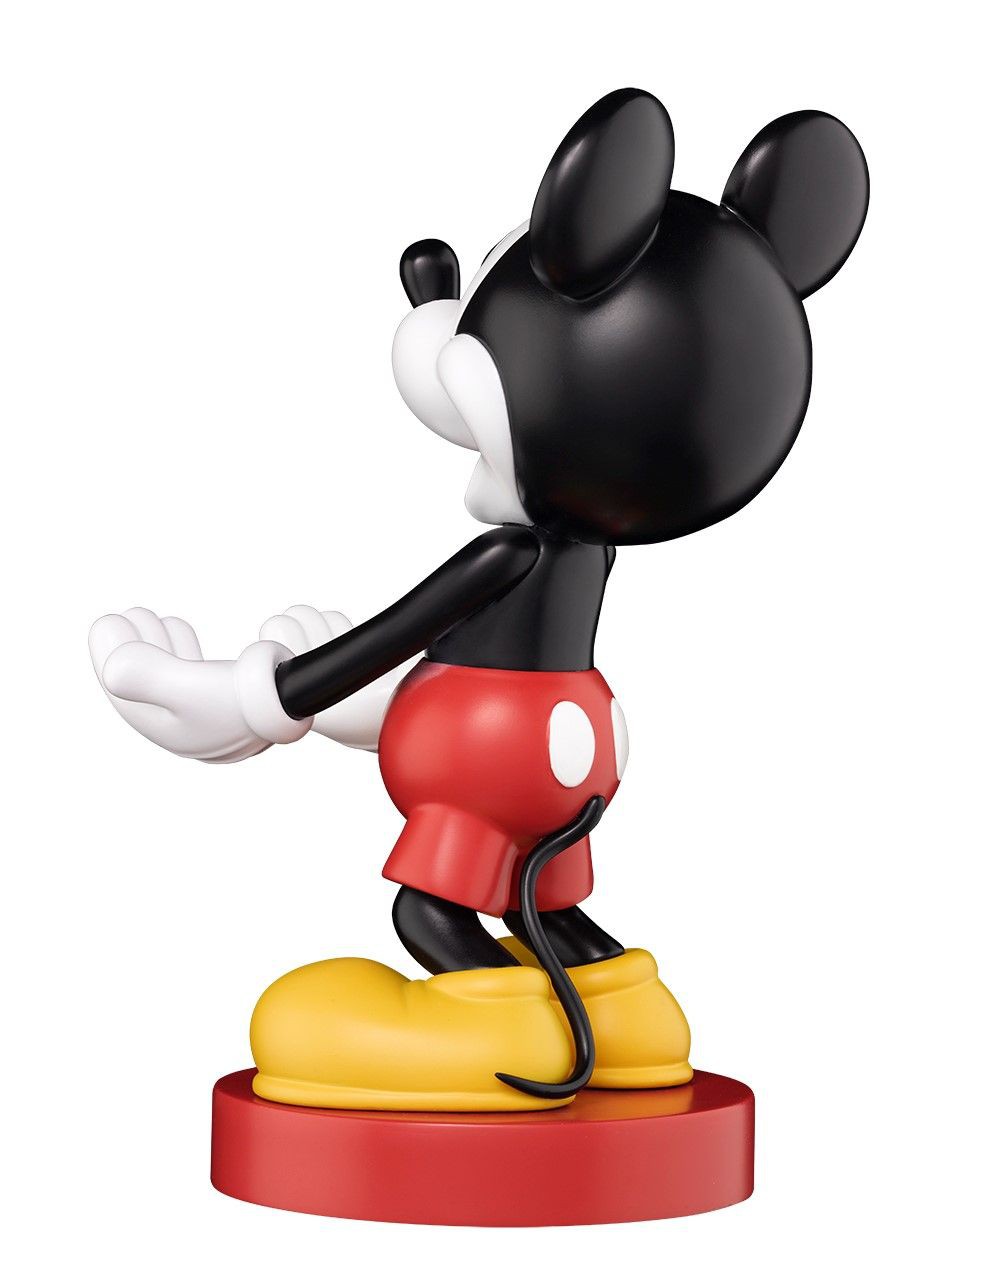 Disney Mickey Mouse Cable Guy stand